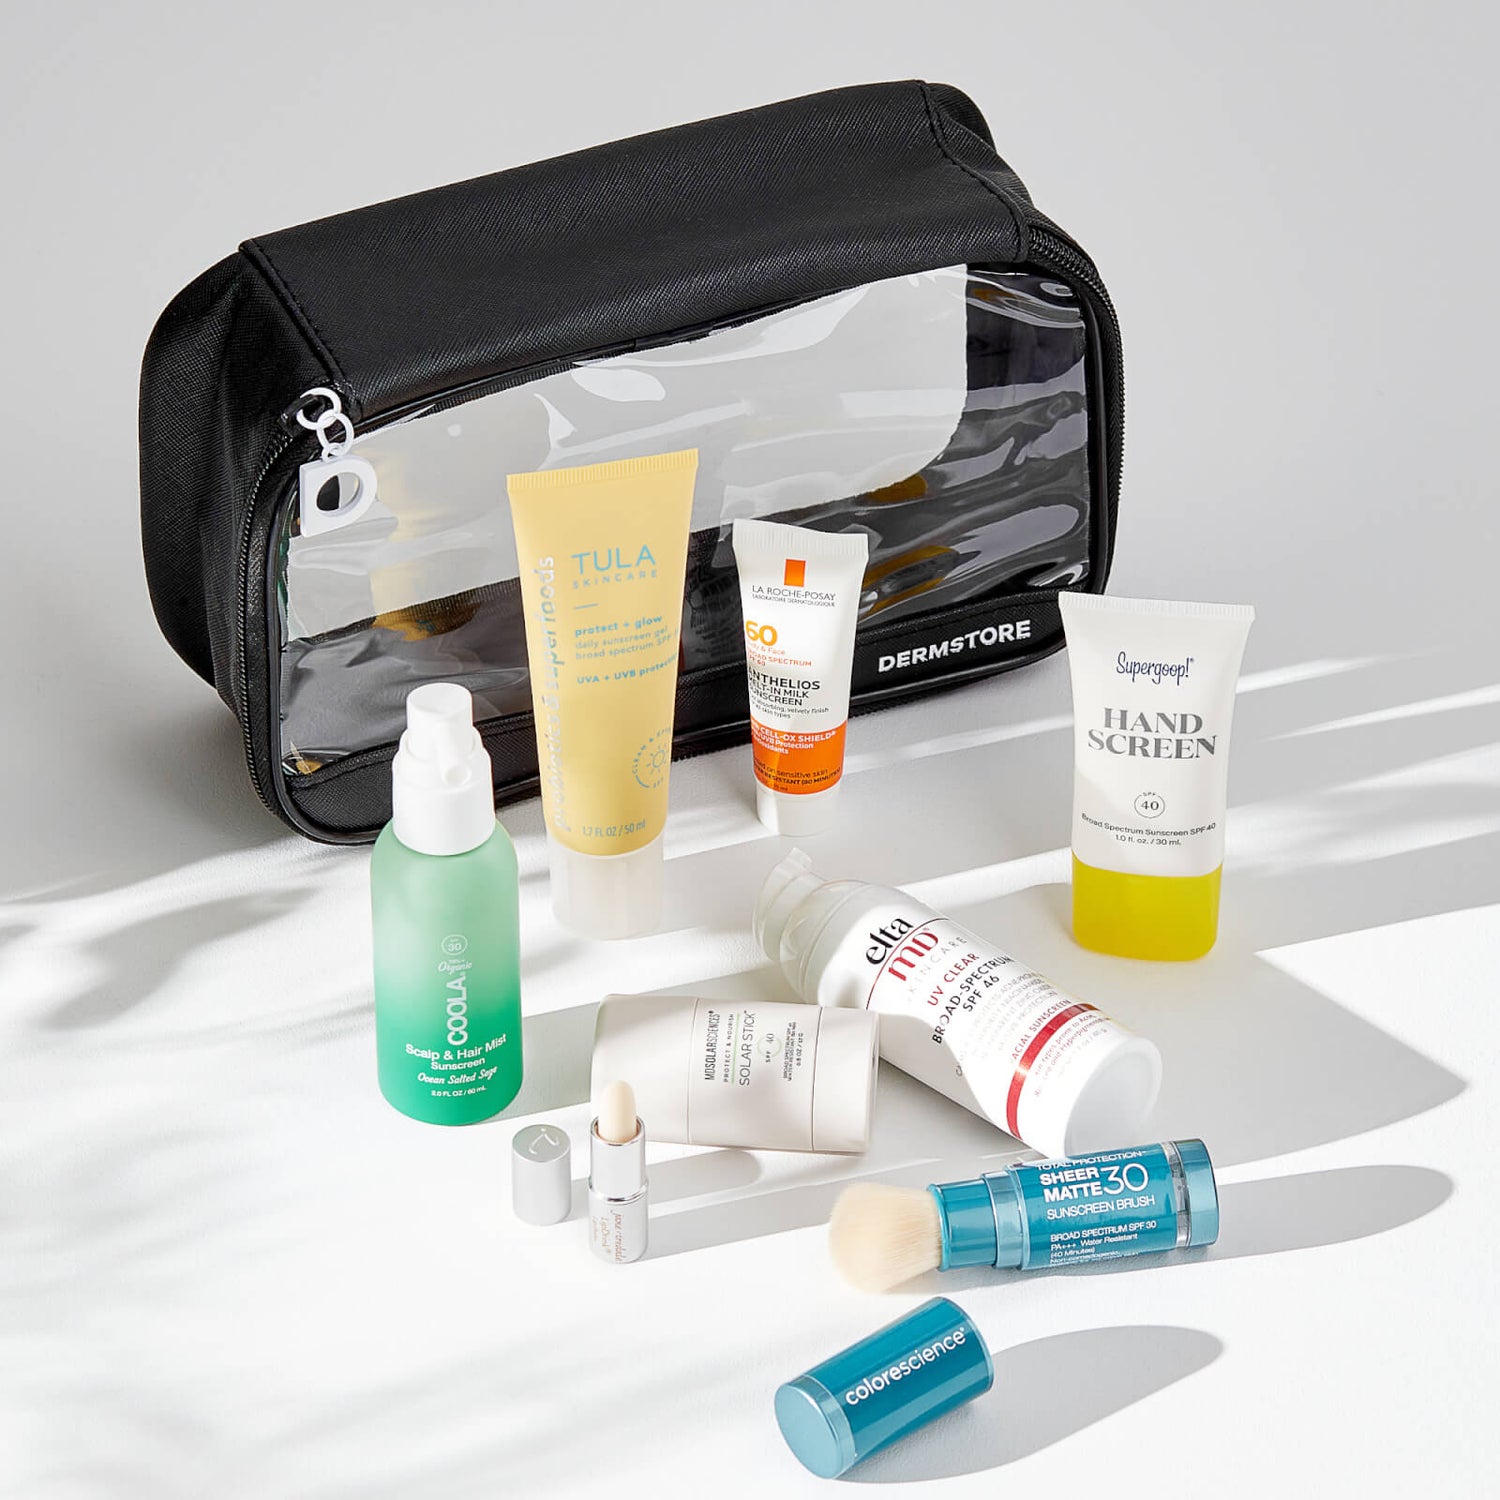 Dermstore x The Skin Cancer Foundation Sun Protection Kit - $212 Value